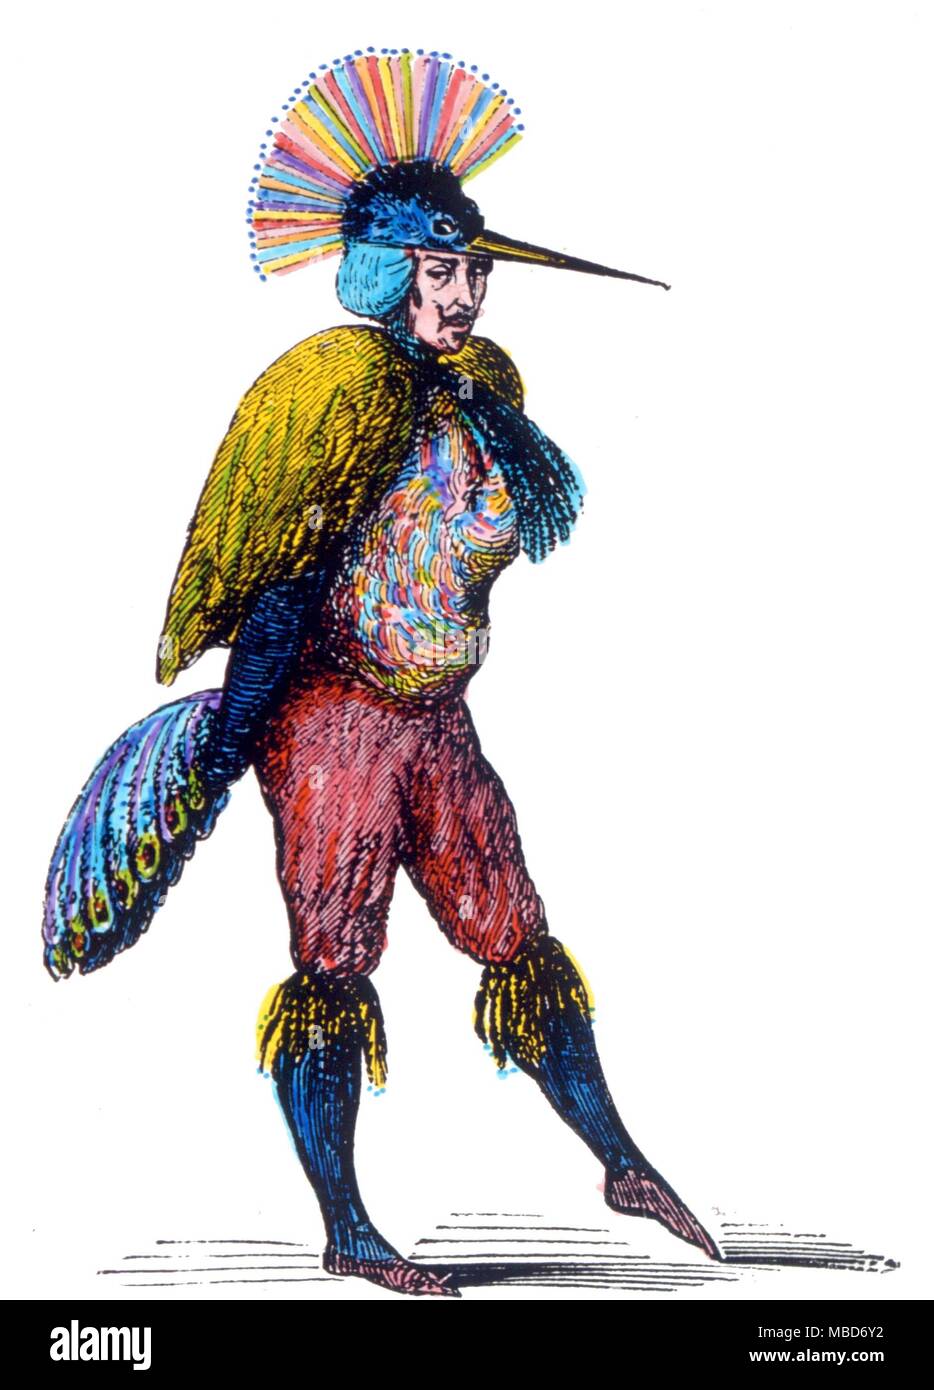 Caym who manifests when evoked partly in the form of a peacock. From Collin de Plancy's Dictionnaire Infernal - 1863 edition Stock Photo